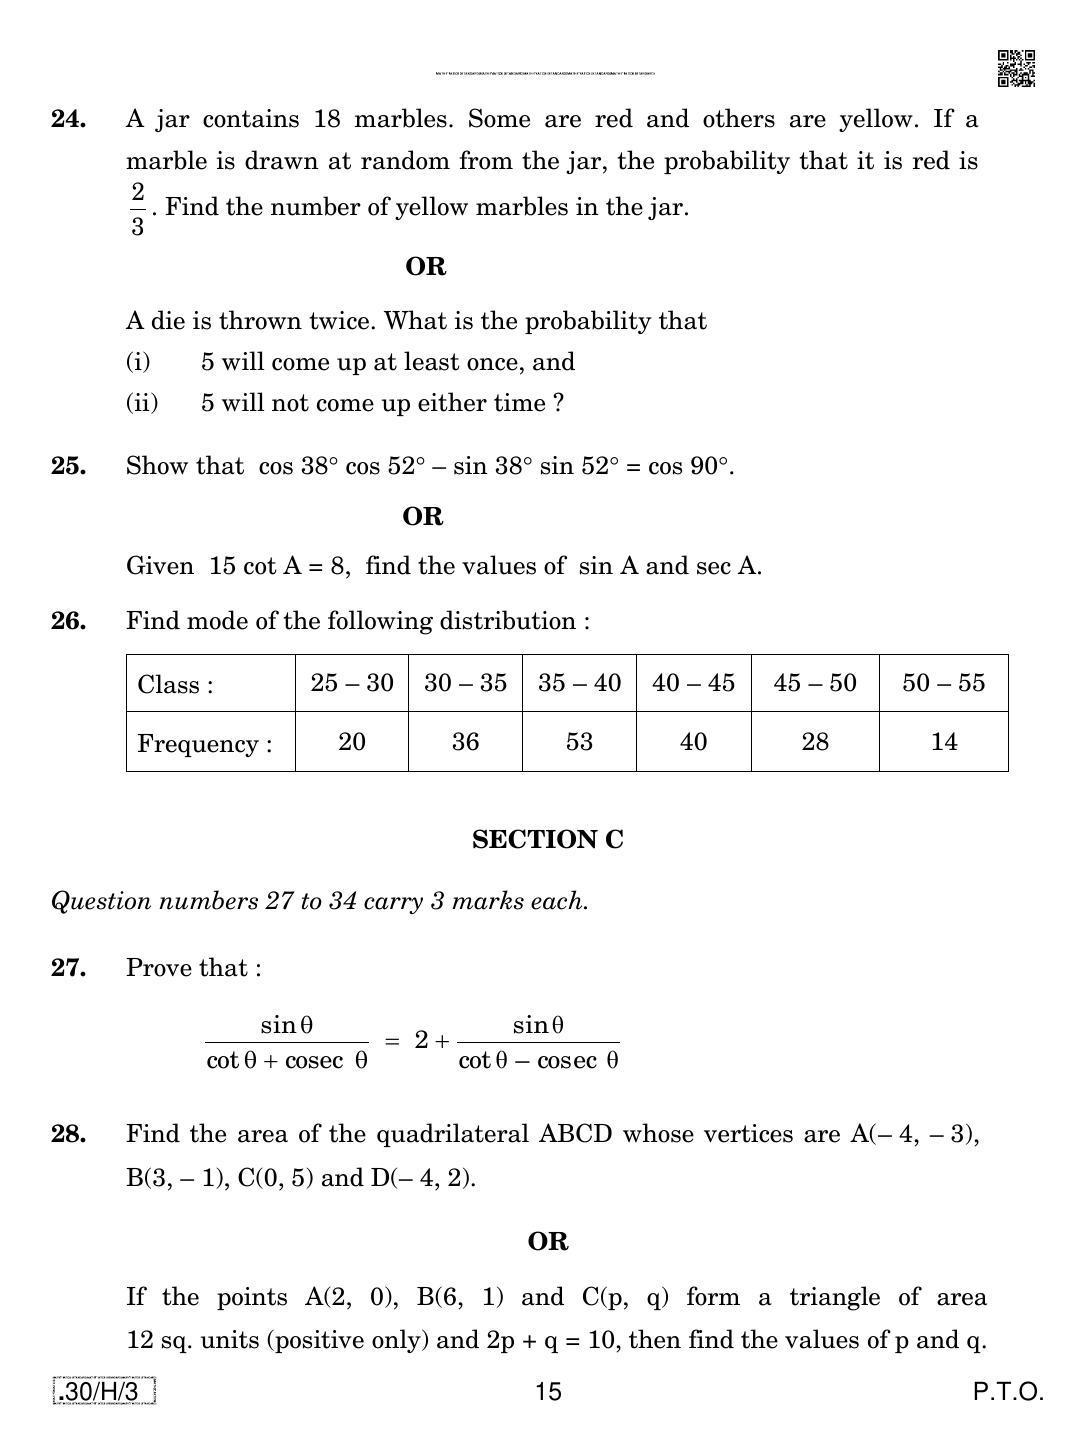 CBSE Class 10 30-C-3 - Maths (Standard) 2020 Compartment Question Paper - Page 15